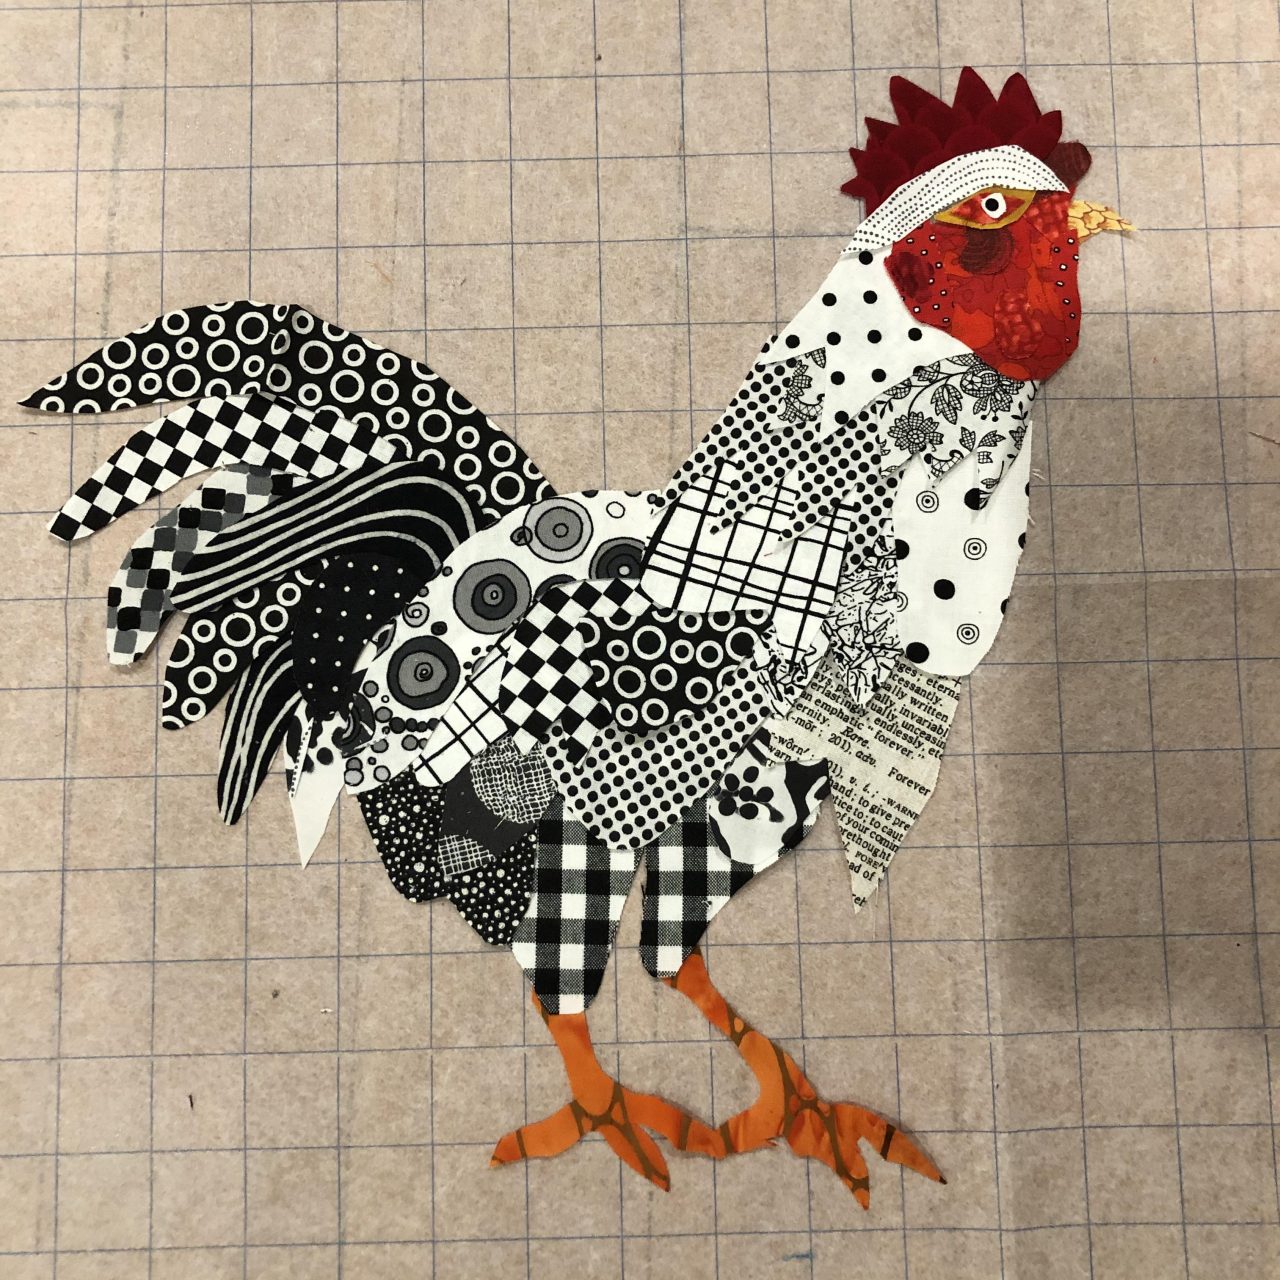 An applique cockerel with a black and white patterned body, orange feet and a red face by Yvonne Iten-Scott. 